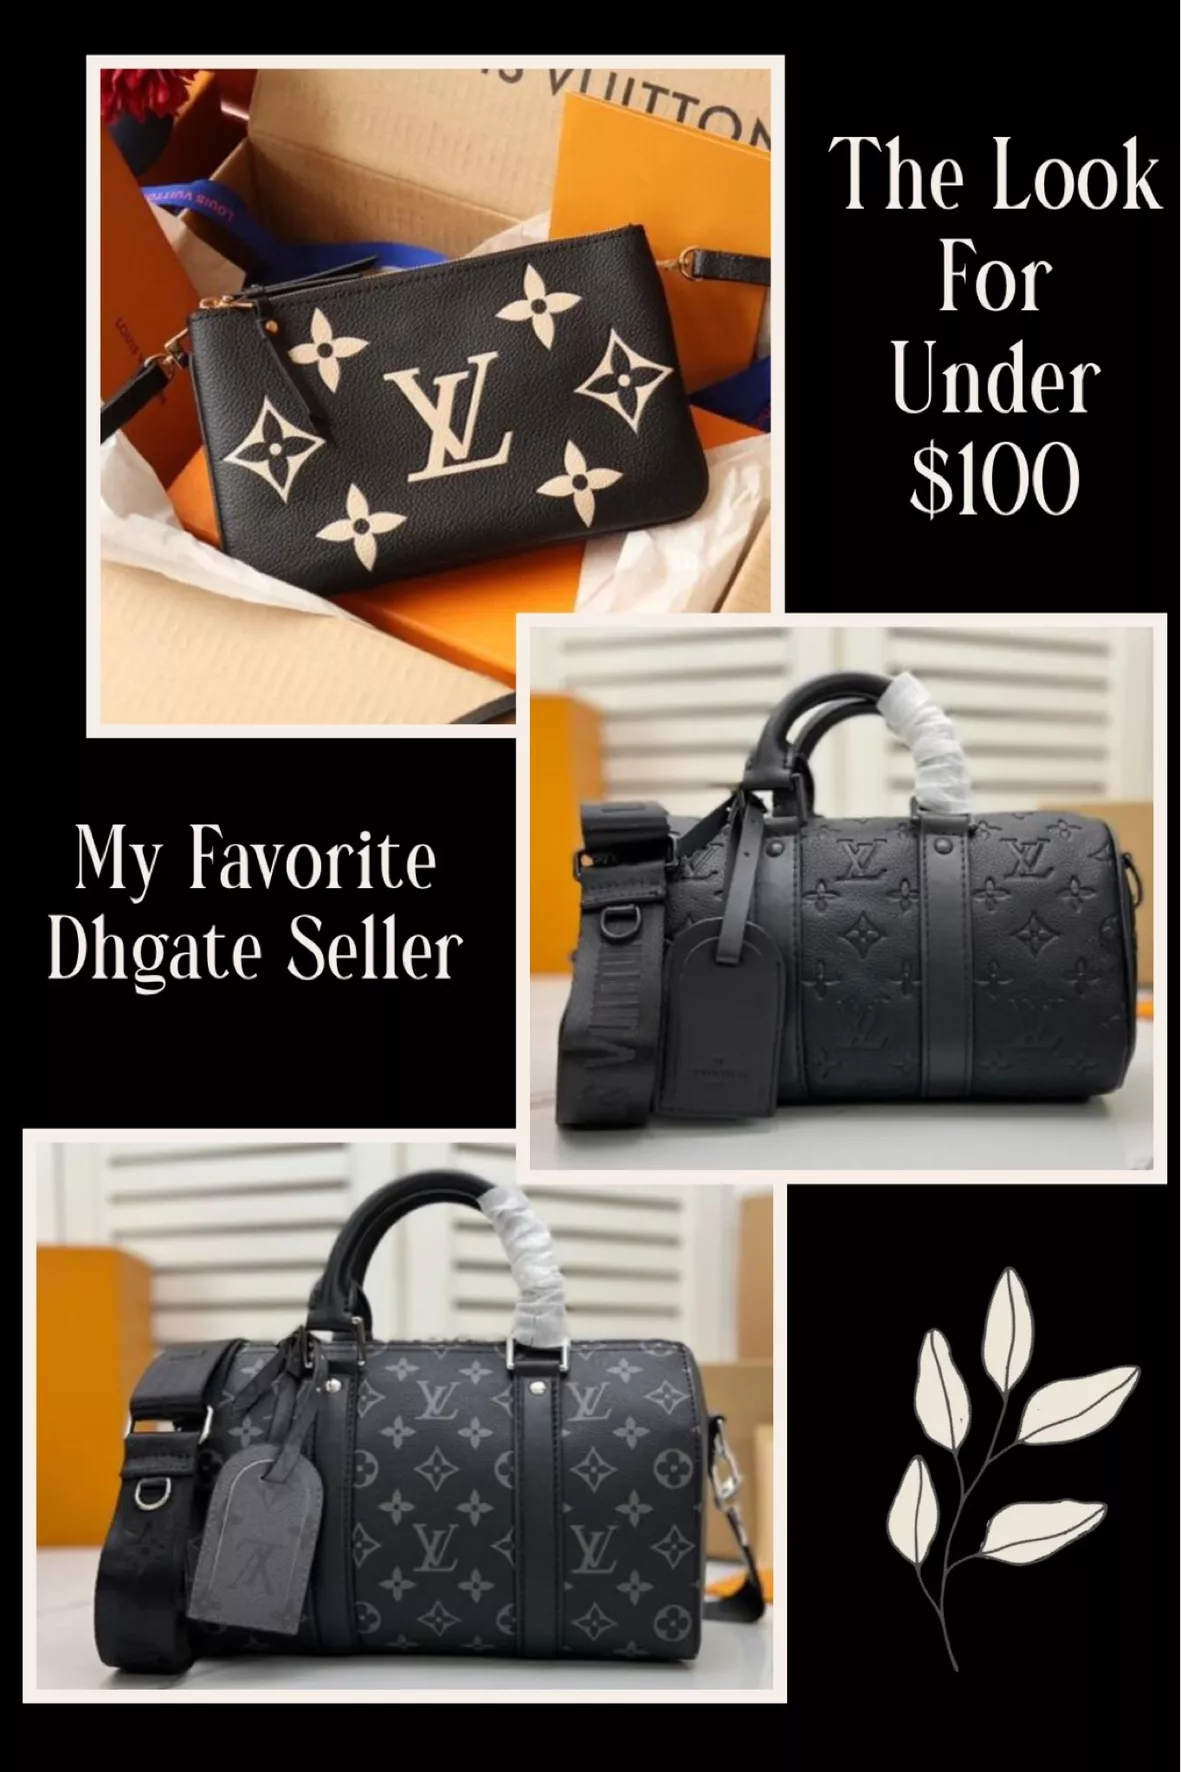 Looking for LV travel : r/DHgate